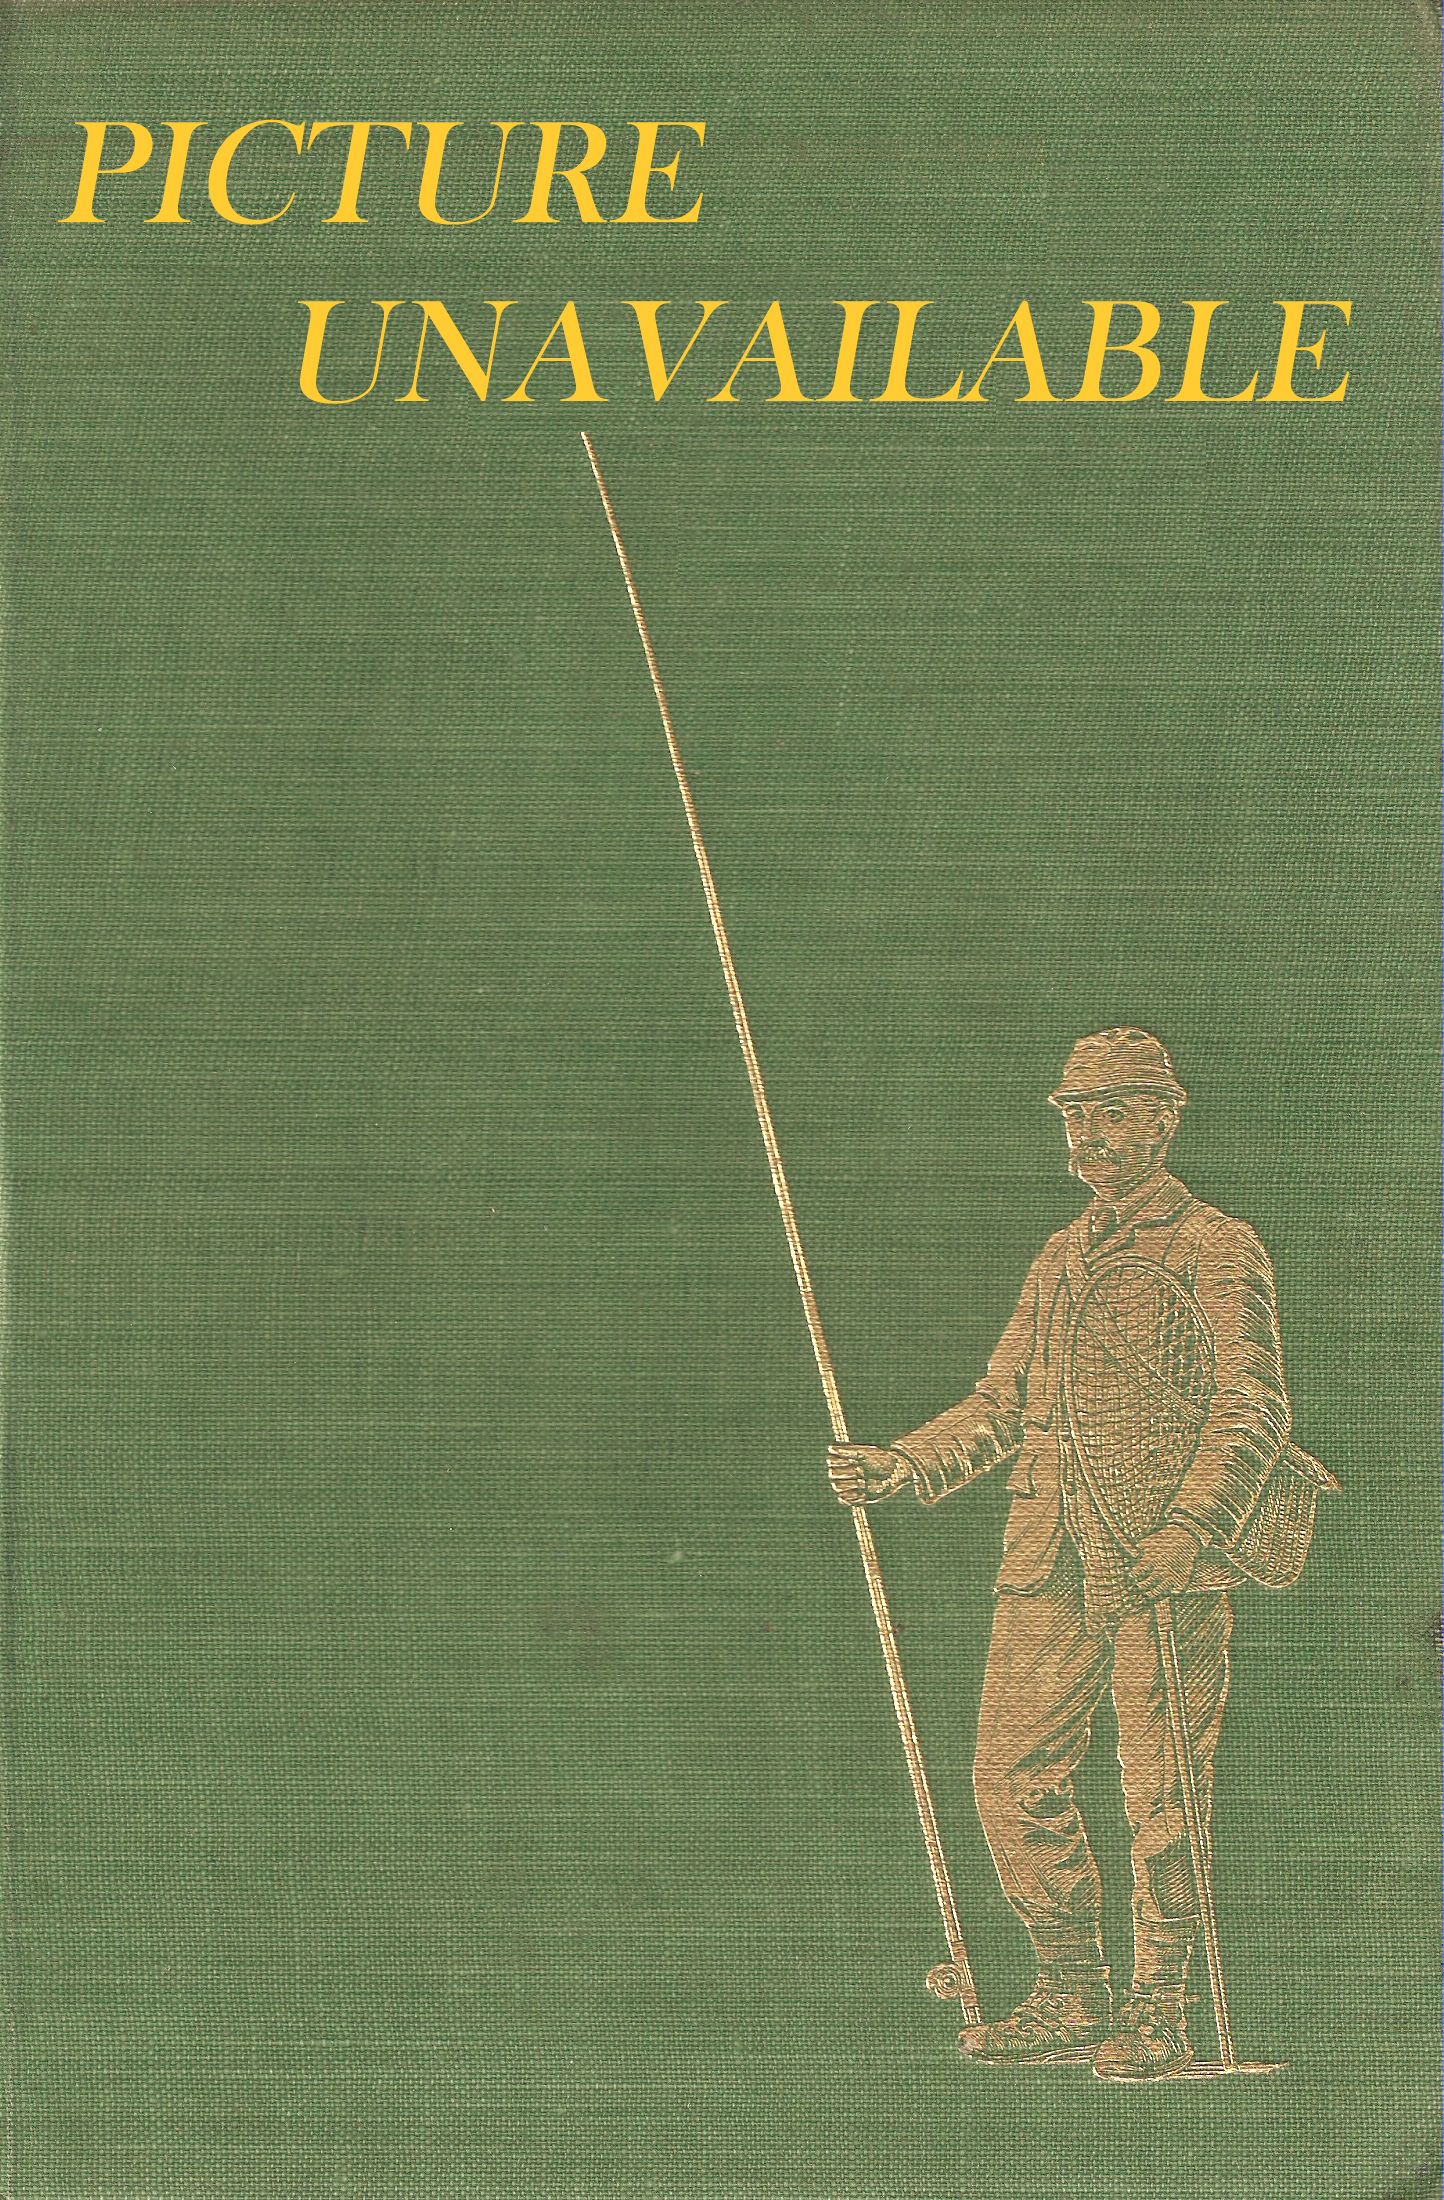 FISHING TACKLE: A COLLECTOR'S GUIDE. By Graham Turner.